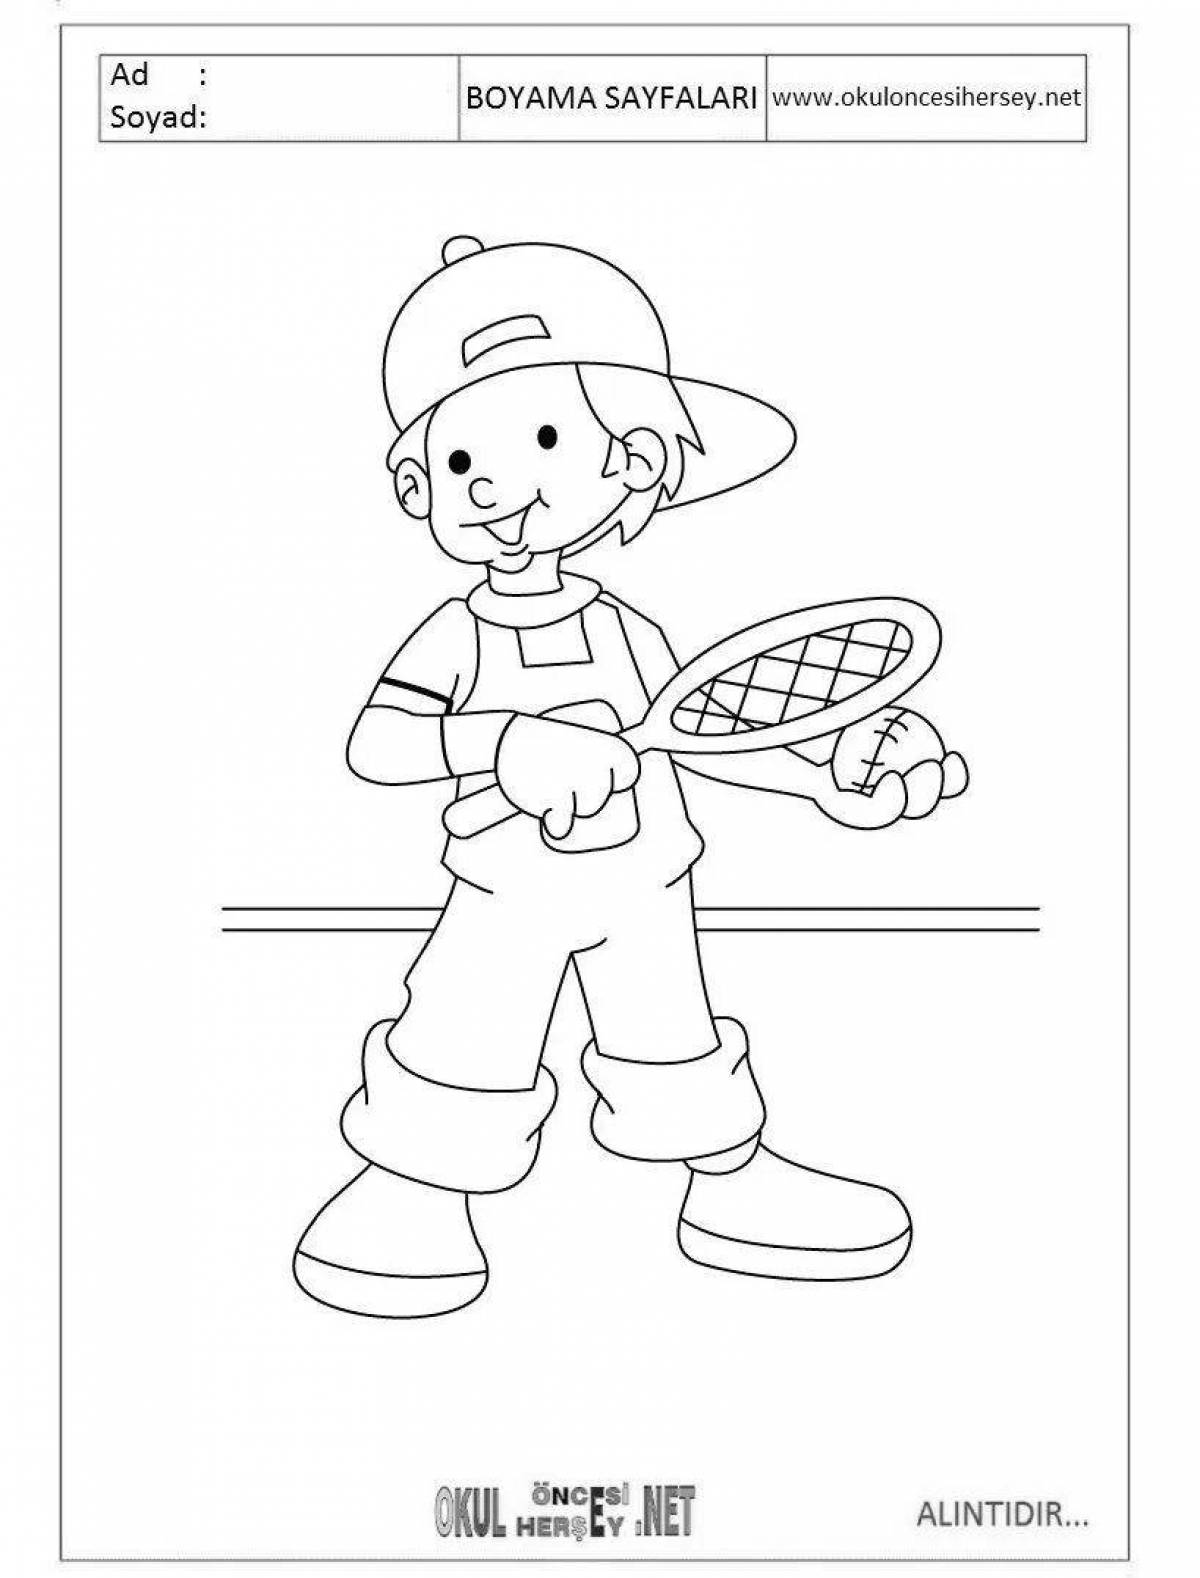 Fun sports coloring book for kids 6-7 years old